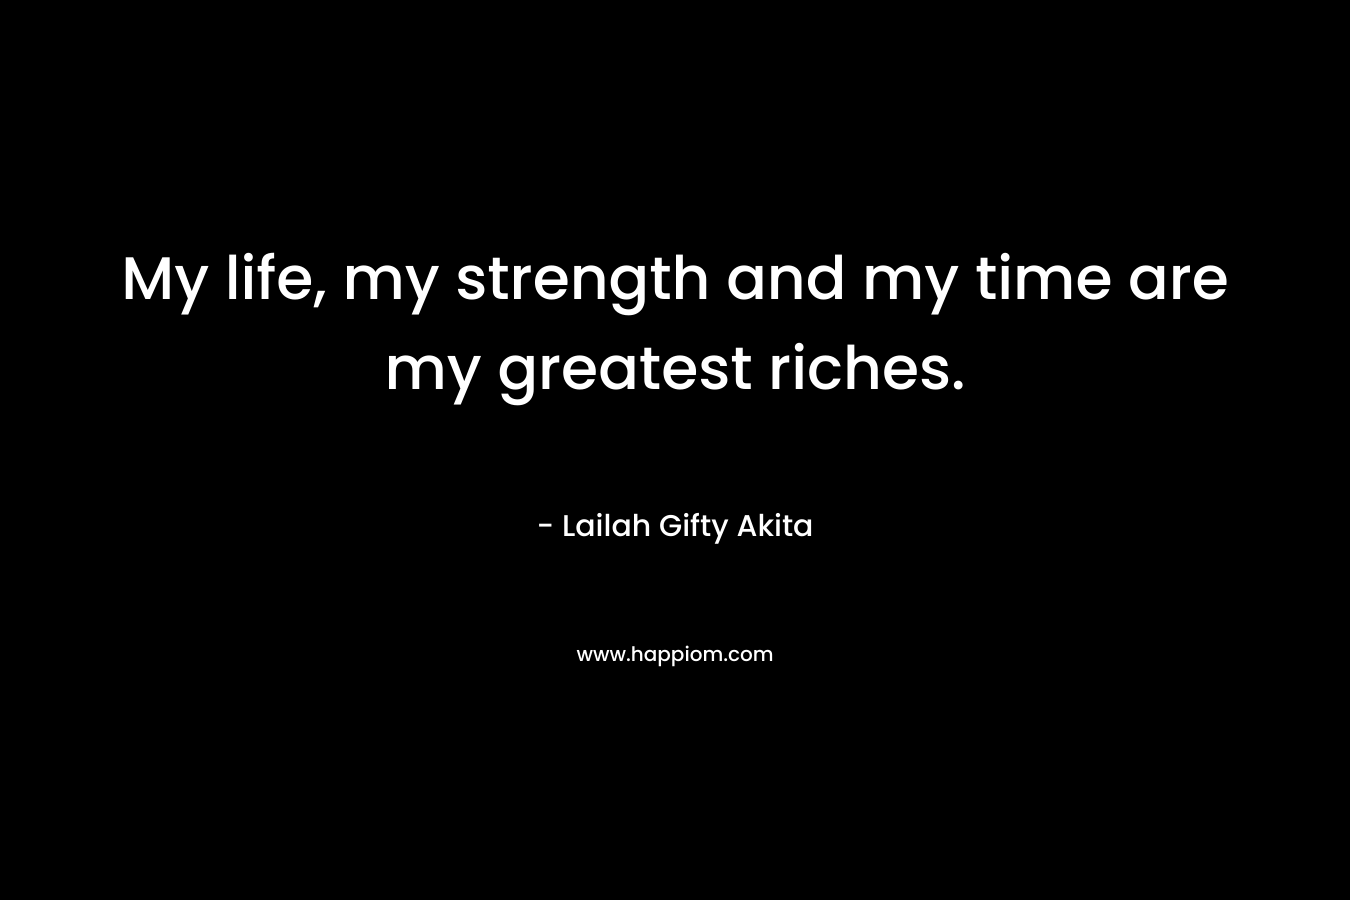 My life, my strength and my time are my greatest riches.